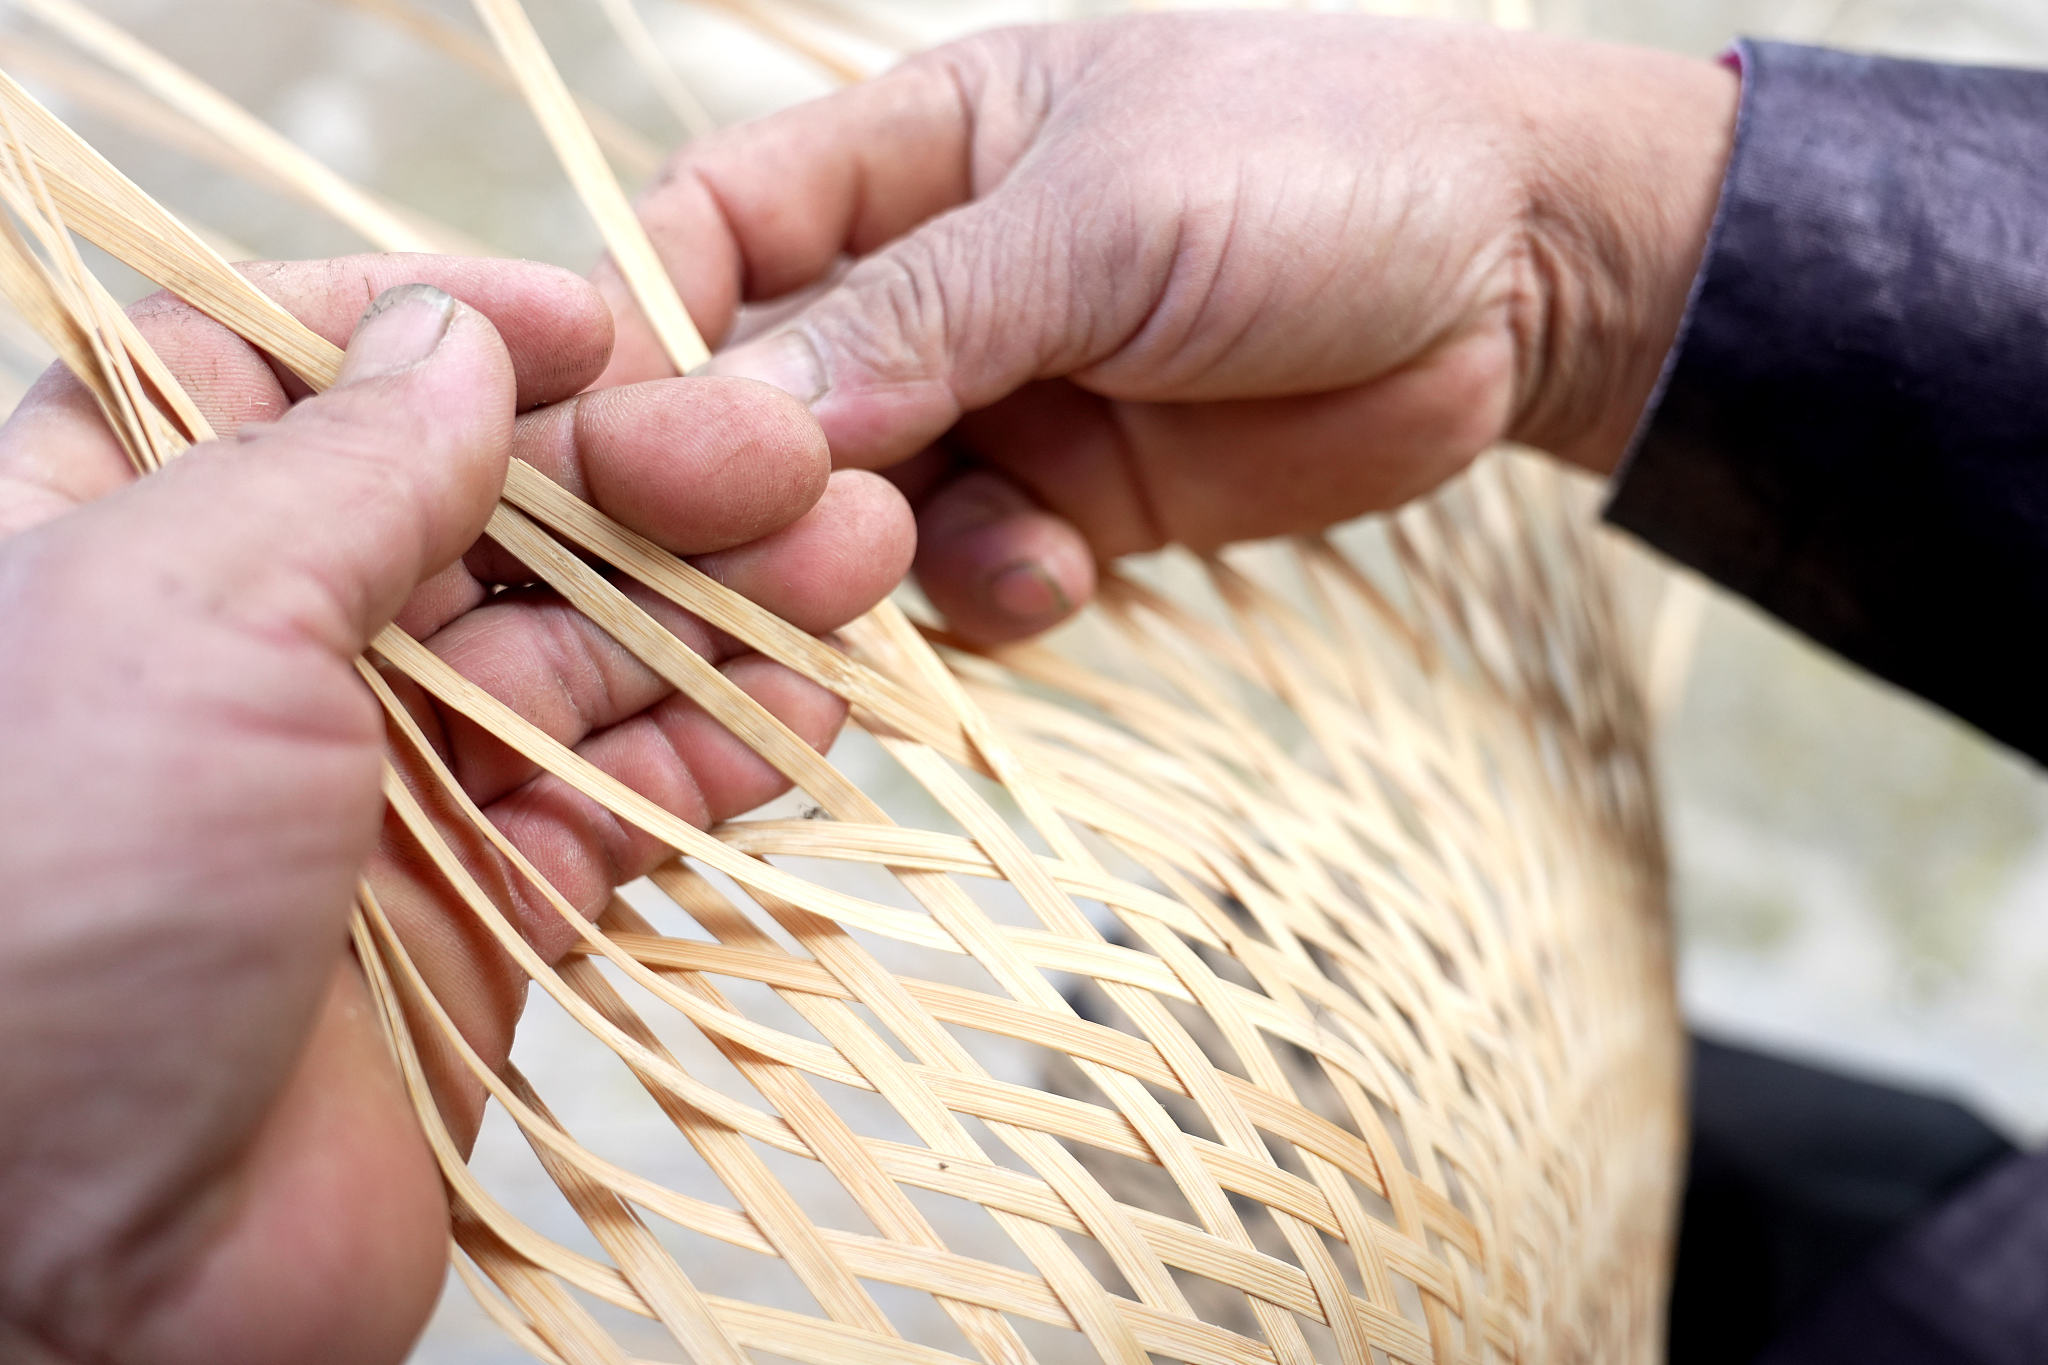 A person weaving bamboo into household utensils. /CFP